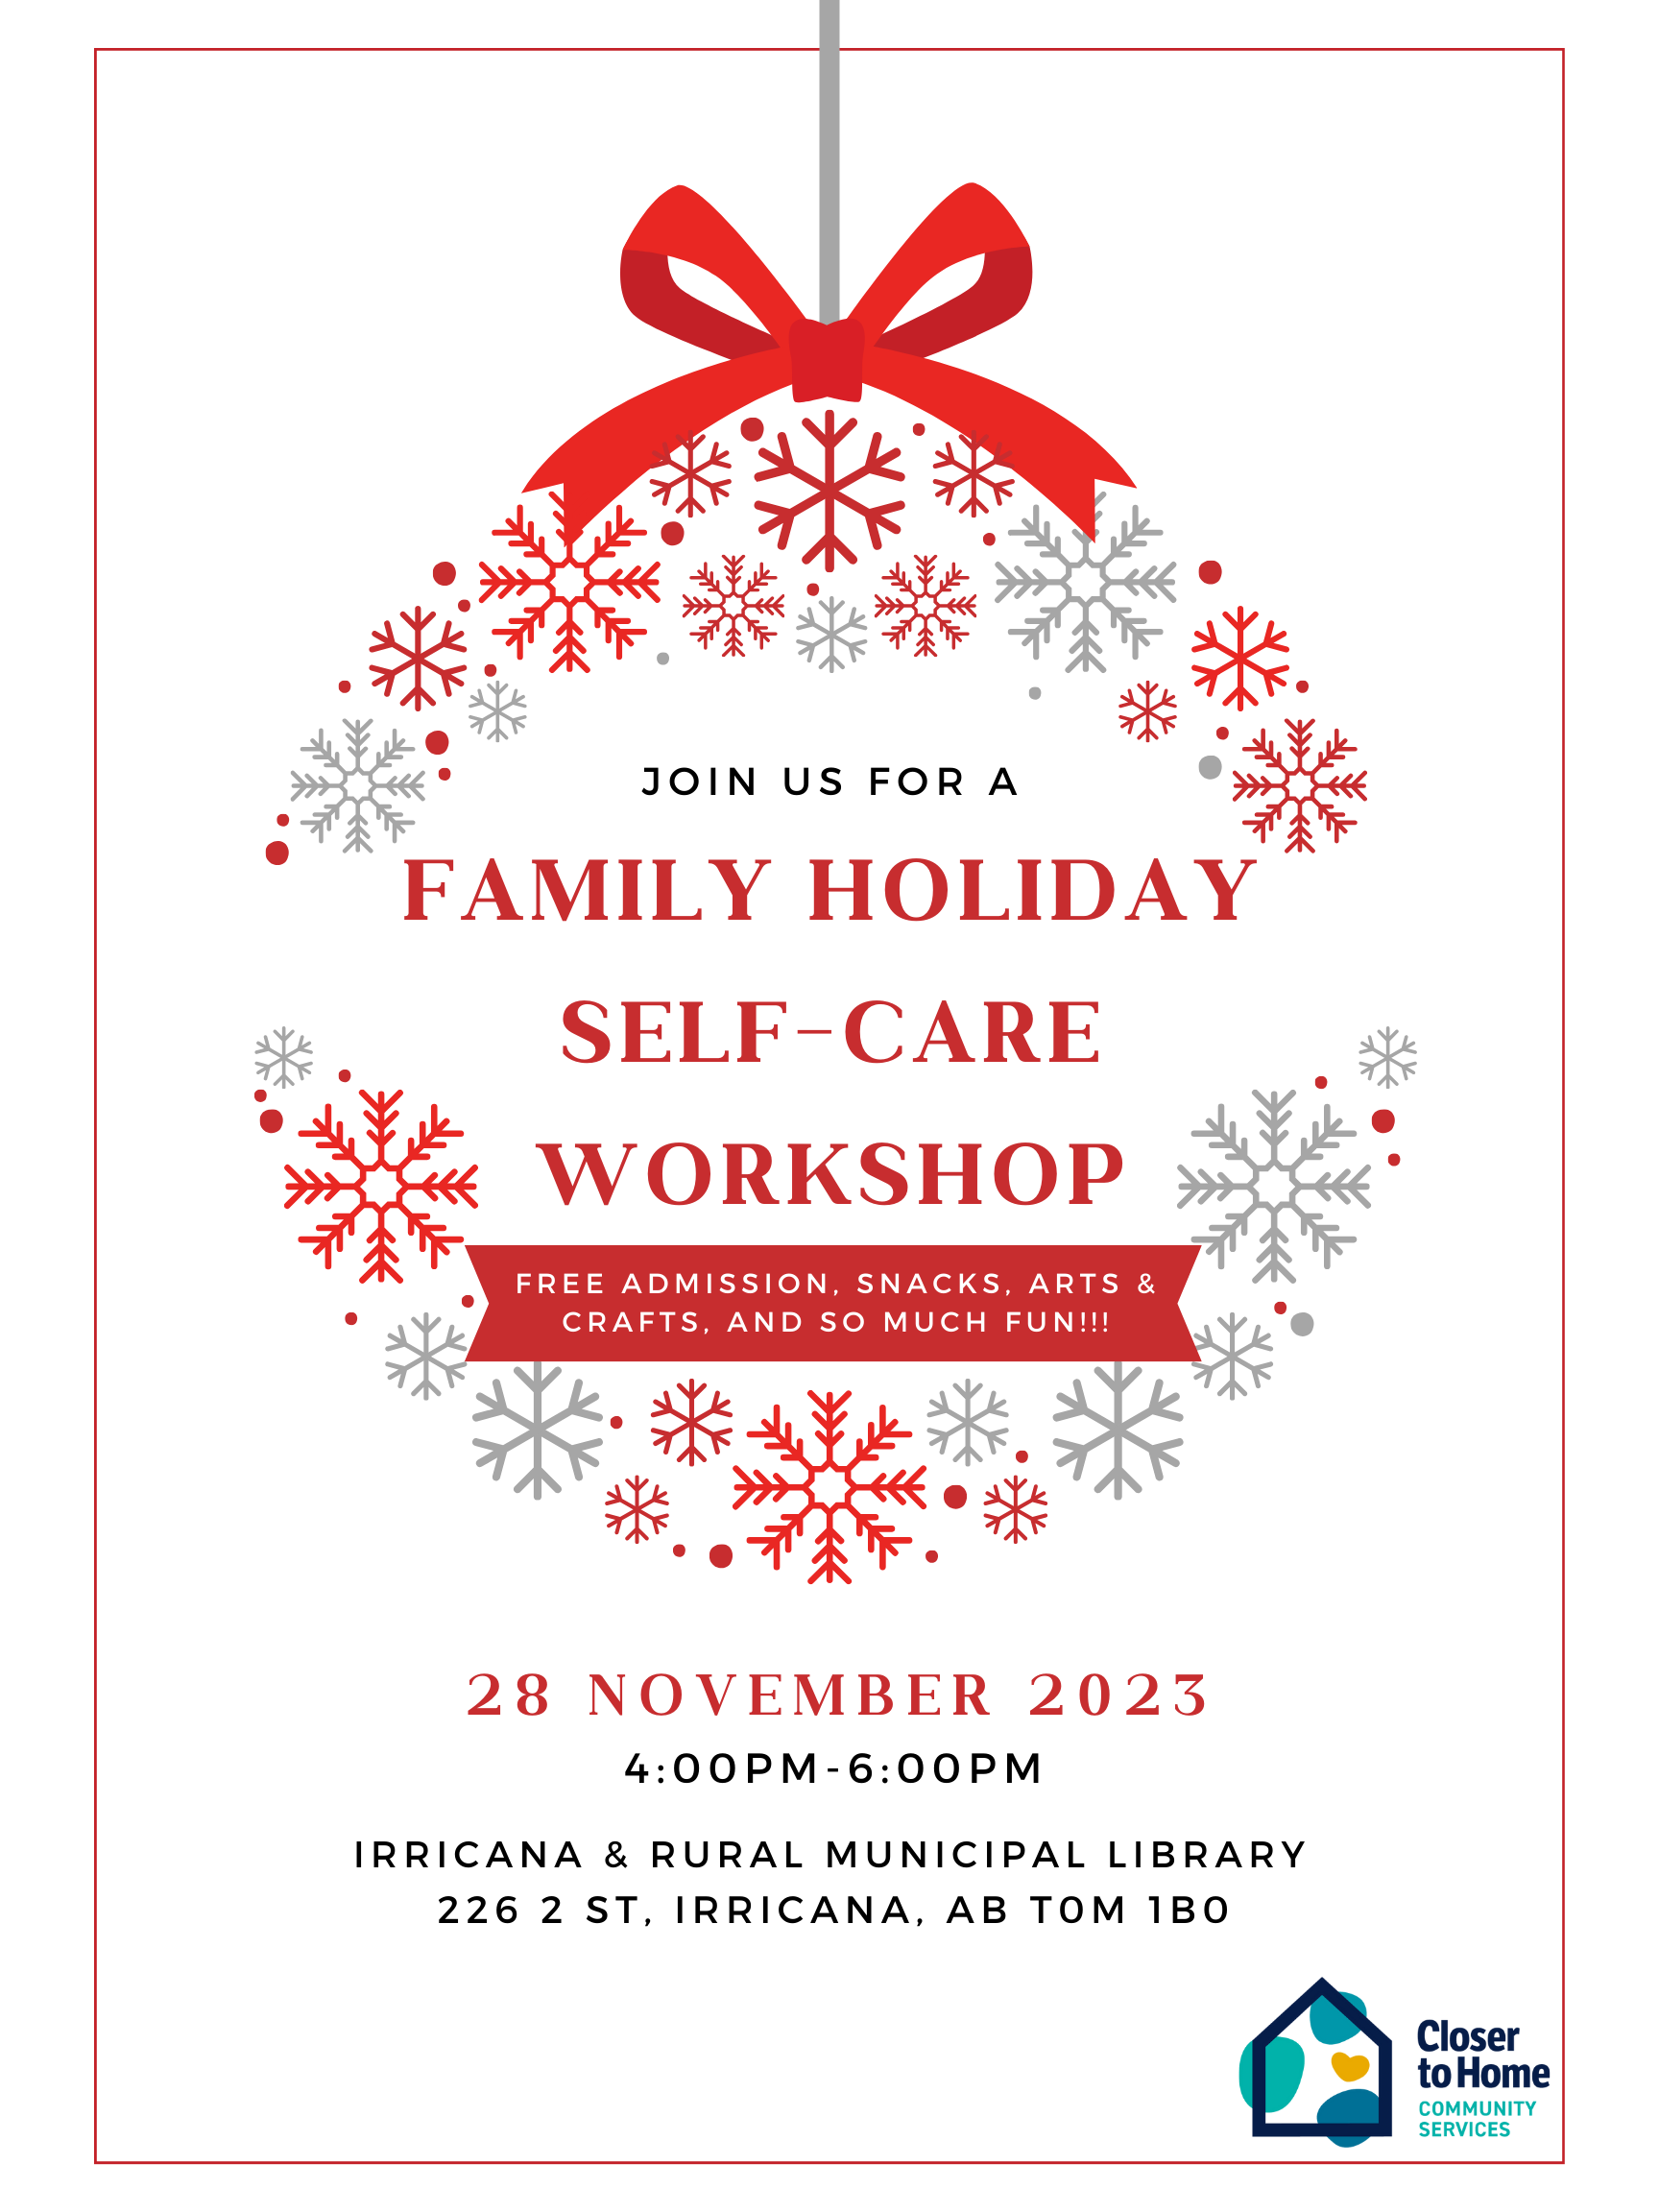 Closer to Home Community Services is hosting a FREE Holiday Self-Care Workshop at the Irricana Library on November 28, 2023